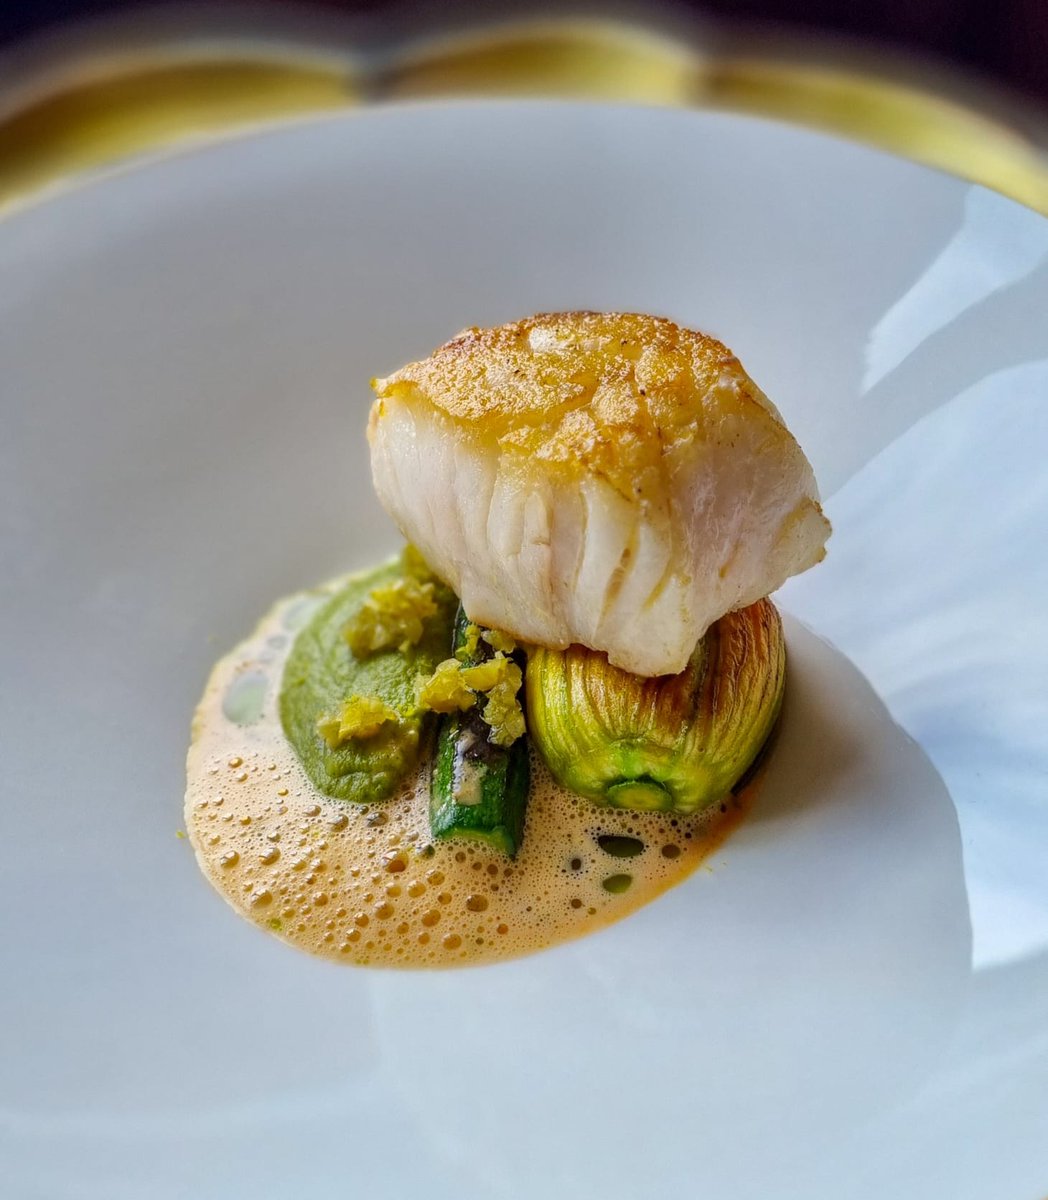 This new dish from #AshfordCastle Executive Chef @liamofinnegan, features Irish Cod and Doonbeg Crab with Courgette, Basil and Garlic Scapes from the Kitchen Gardens on the Estate.  #RedCarnationHotels #WildAtlanticWay #IrishFood